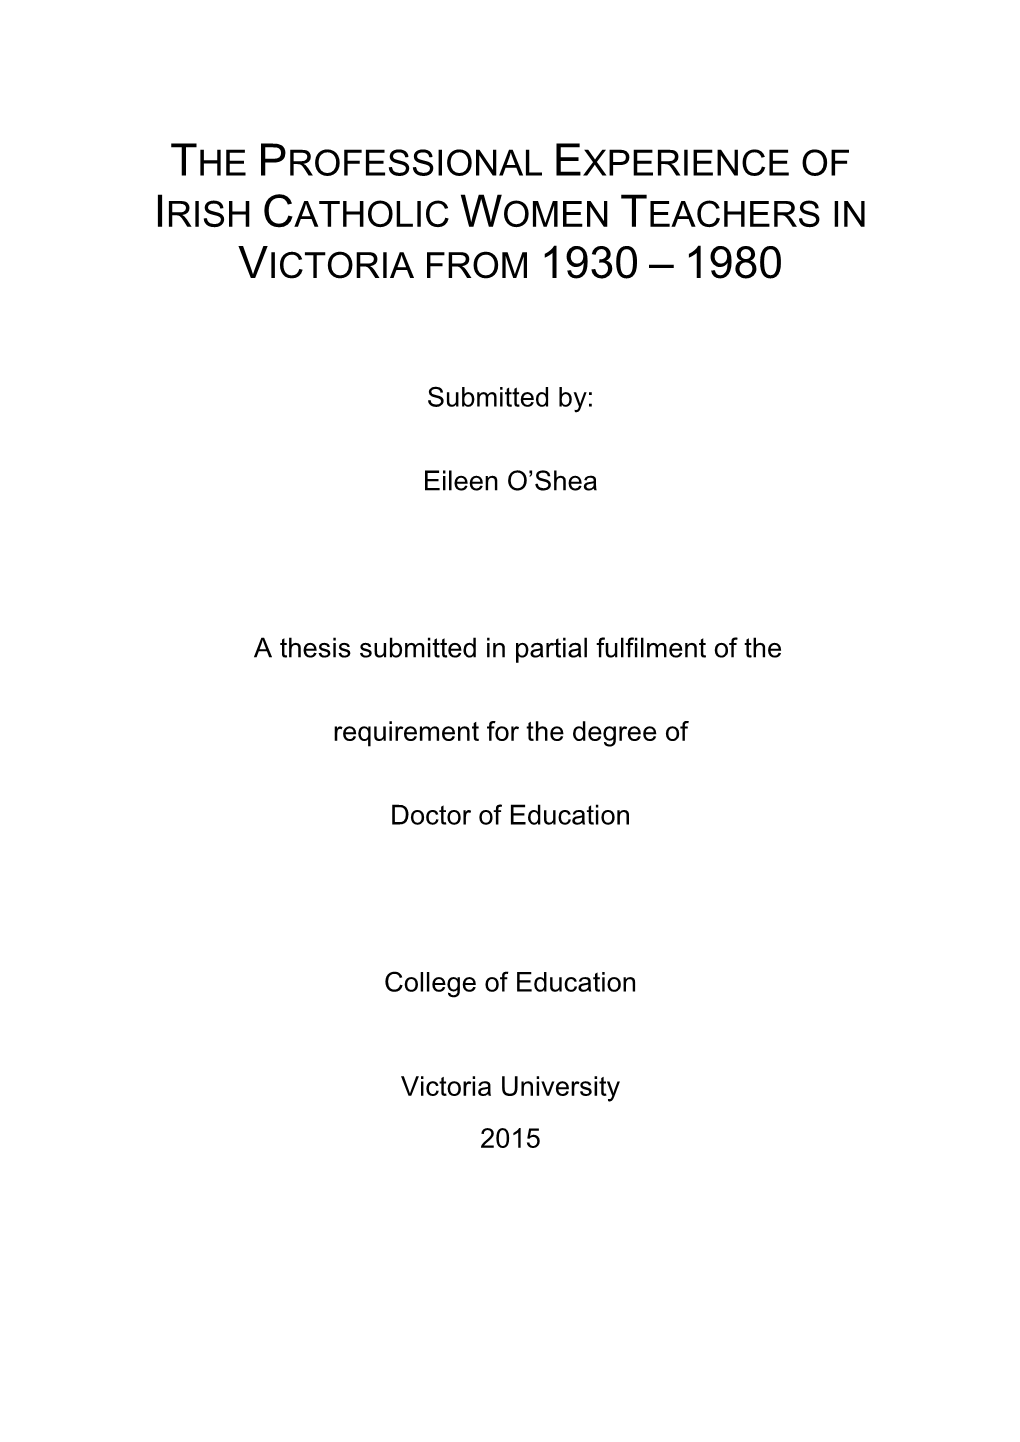 The Professional Experience of Irish Catholic Women Teachers in Victoria from 1930 – 1980